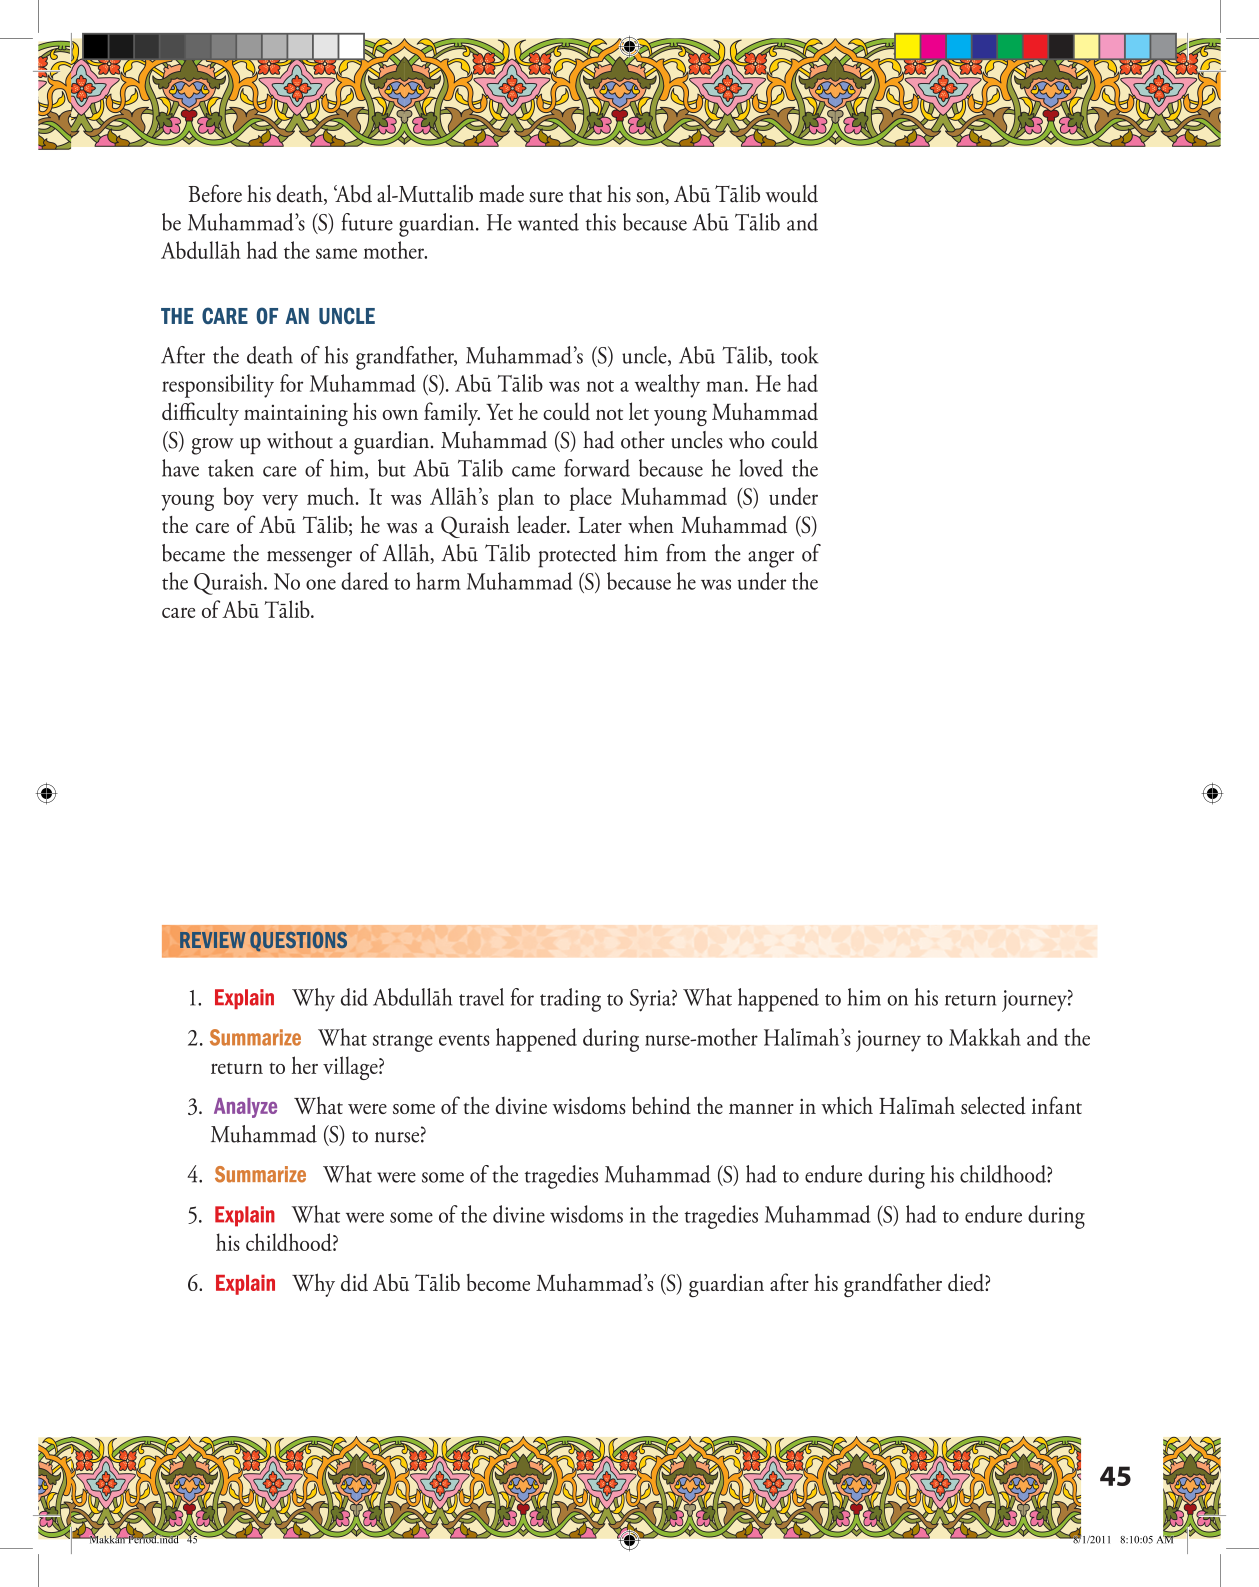 Life of Rasulullah - Makkah Period - Seerah - Weekend Learning Publishers - Sample Lesson - Page 45